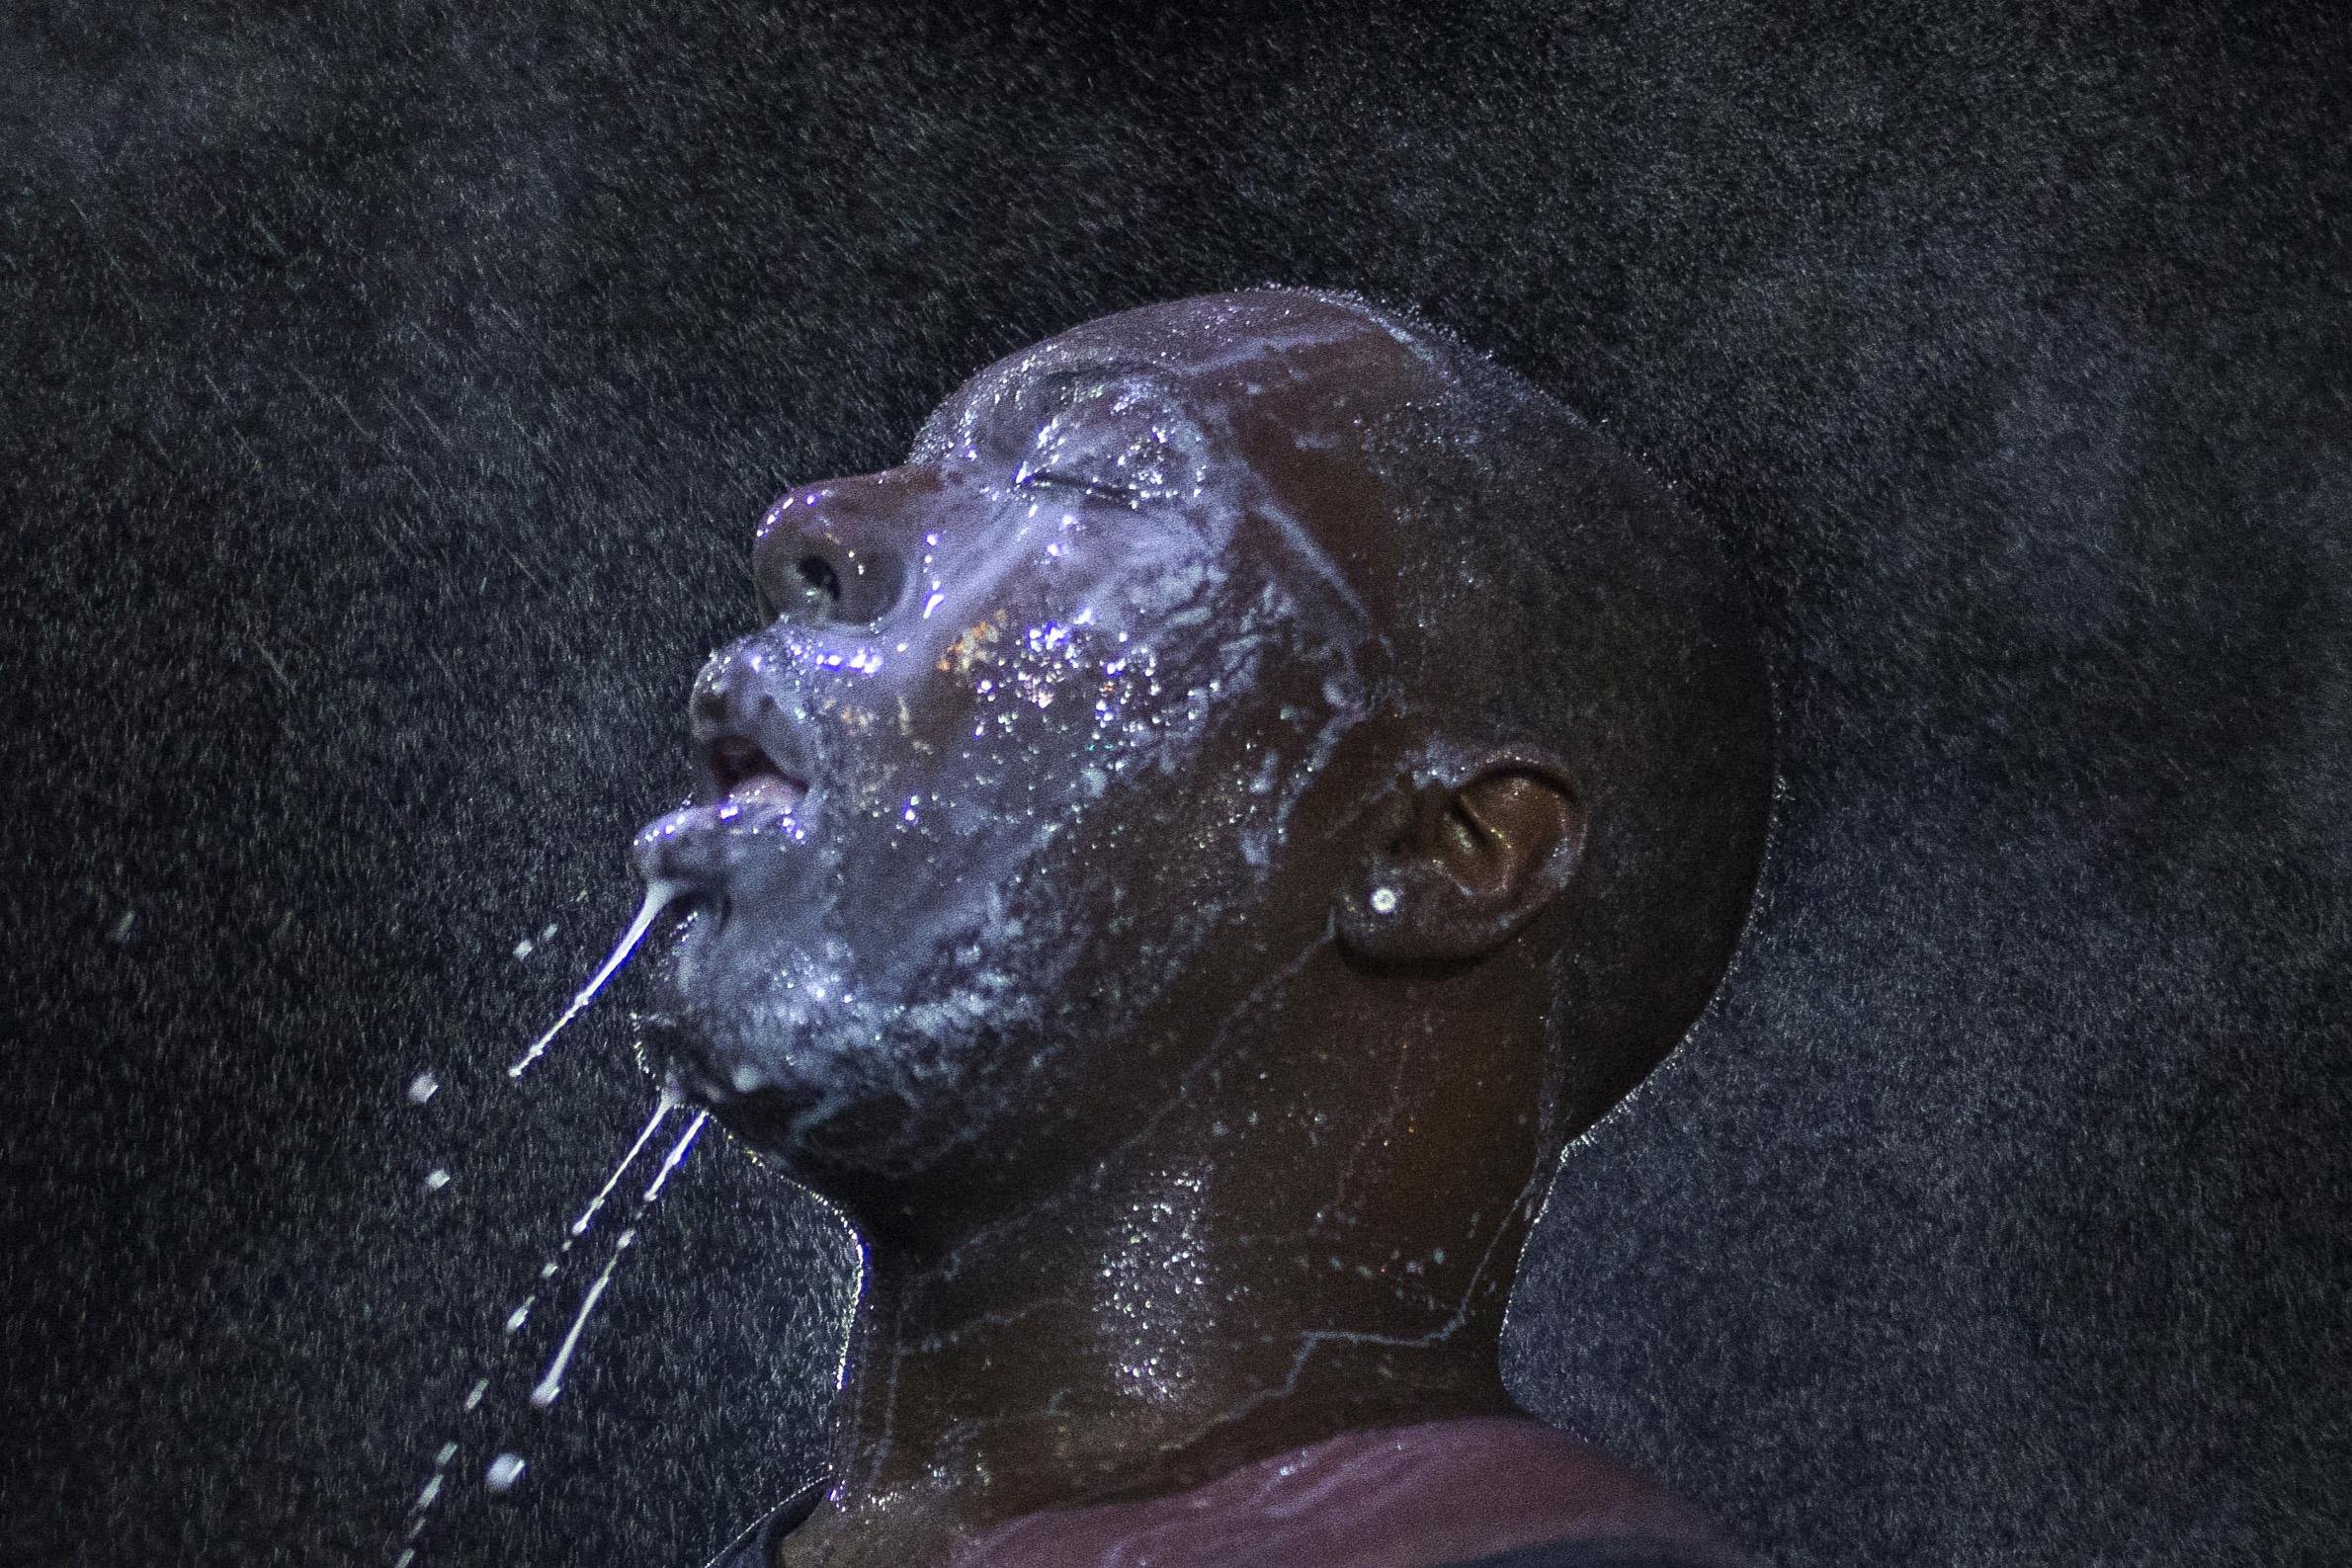 A man is doused with milk and sprayed with mist after being hit by an eye irritant from security forces trying to disperse demonstrators protesting against the shooting of Brown in Ferguson